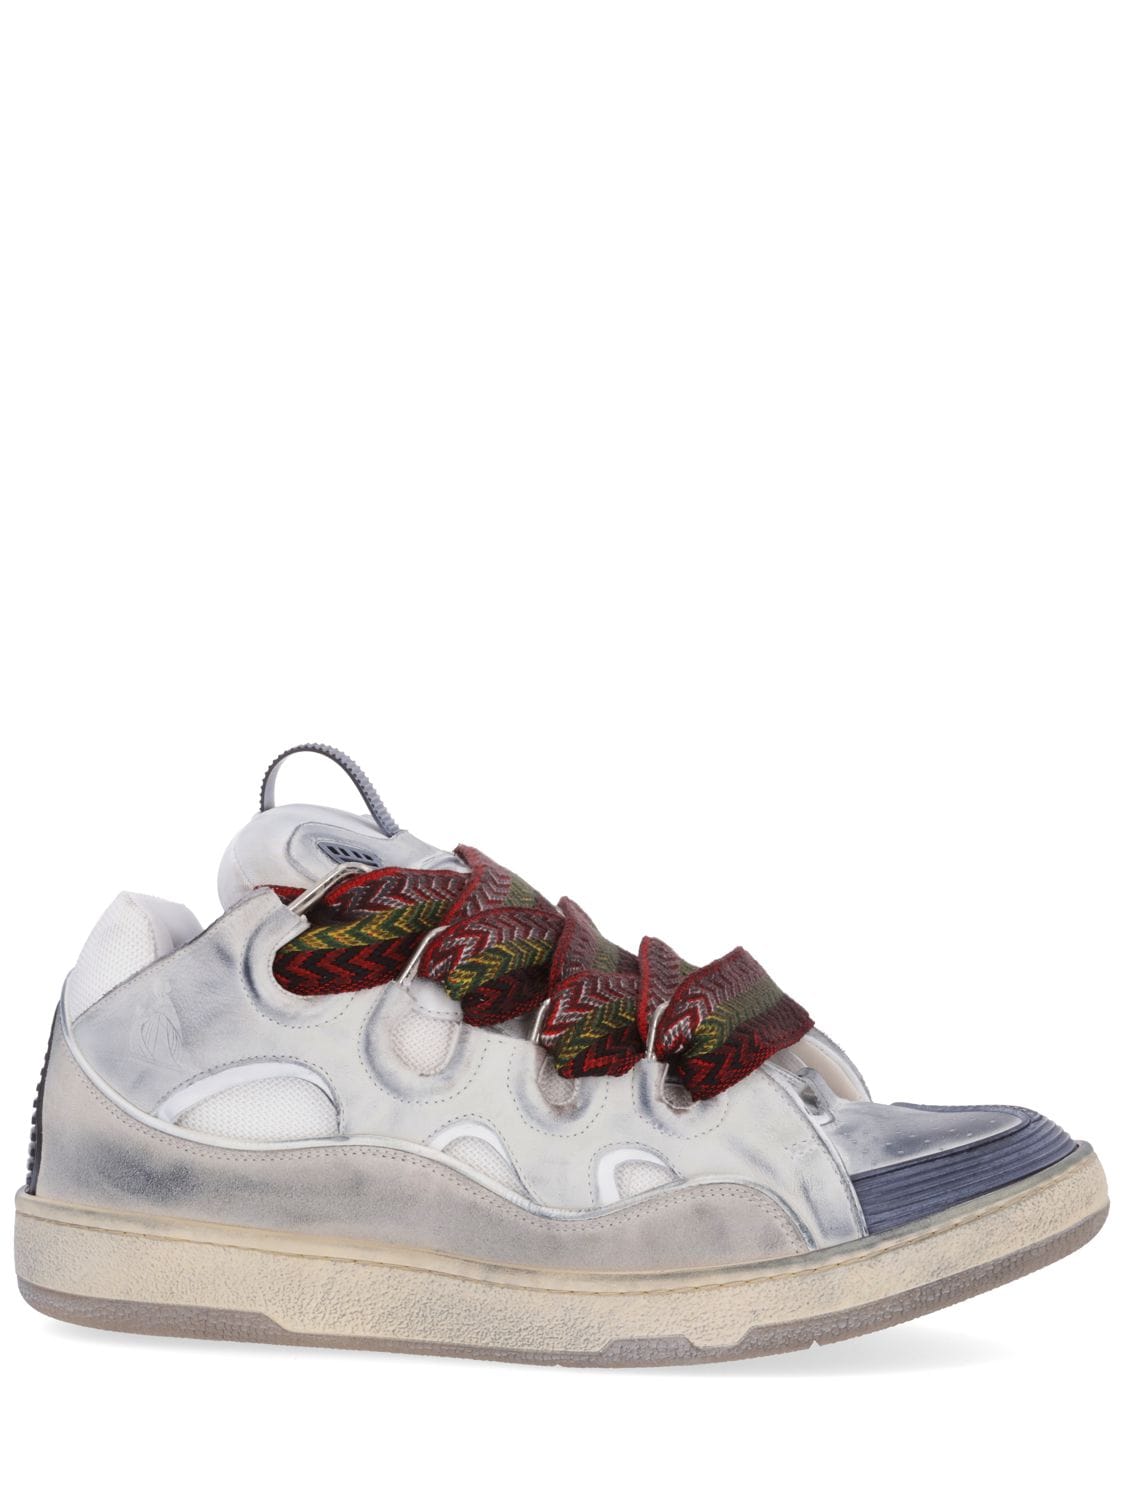 Lanvin Curb Vintage Leather Sneakers In White